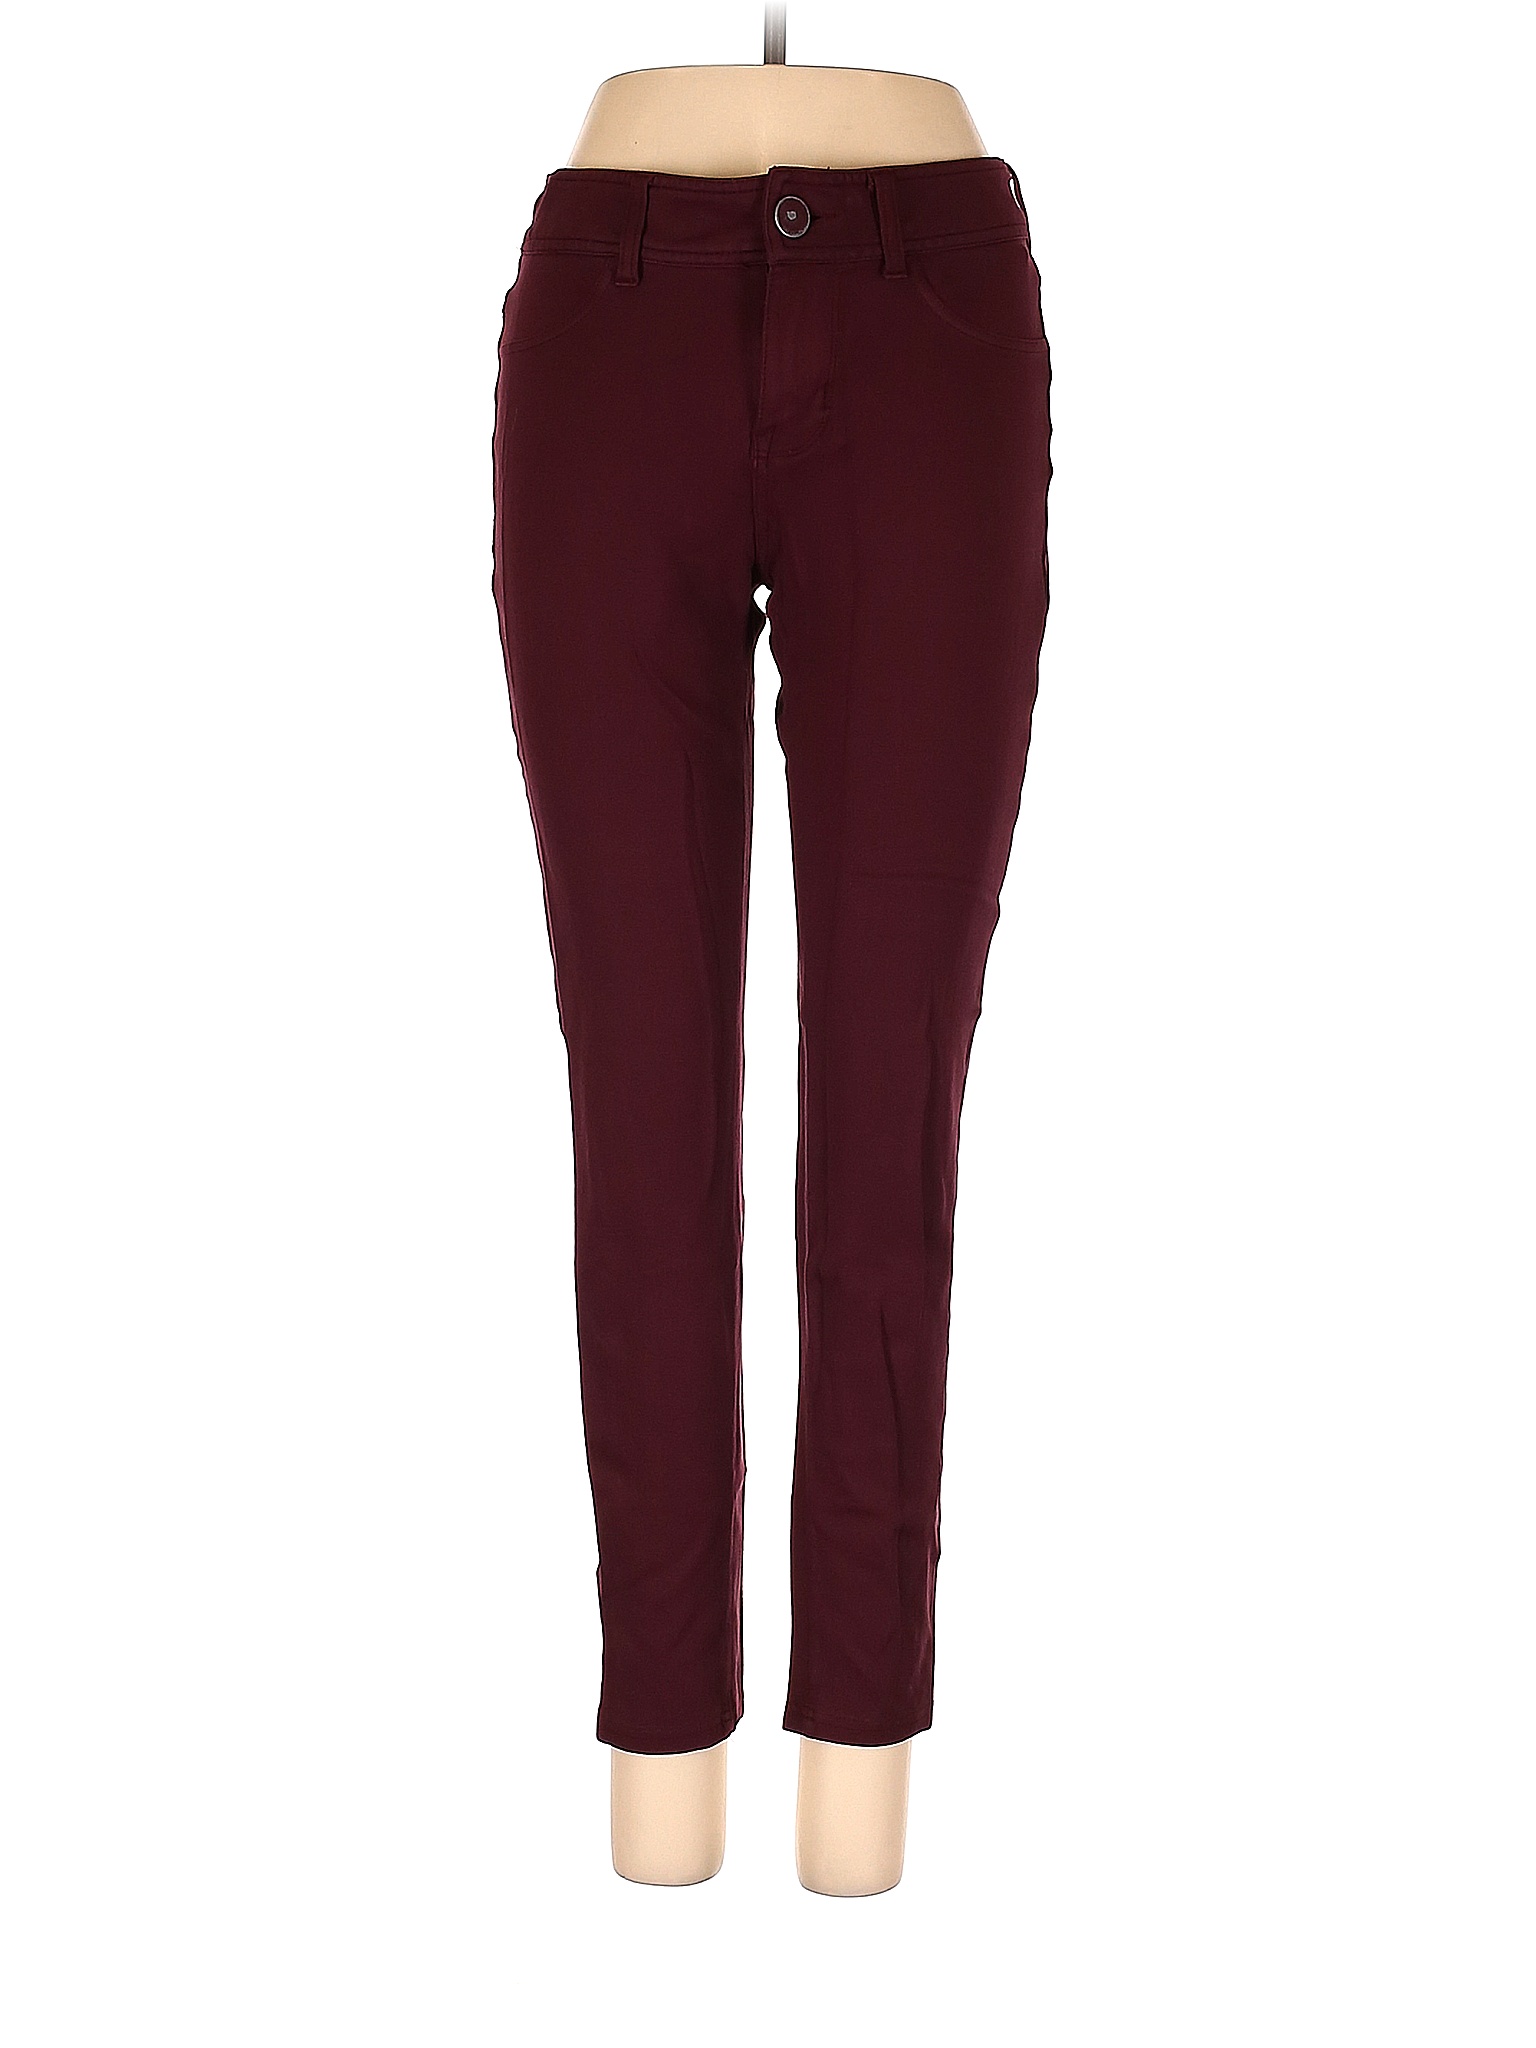 Seven7 Solid Colored Burgundy Casual Pants Size 4 - 73% off | thredUP